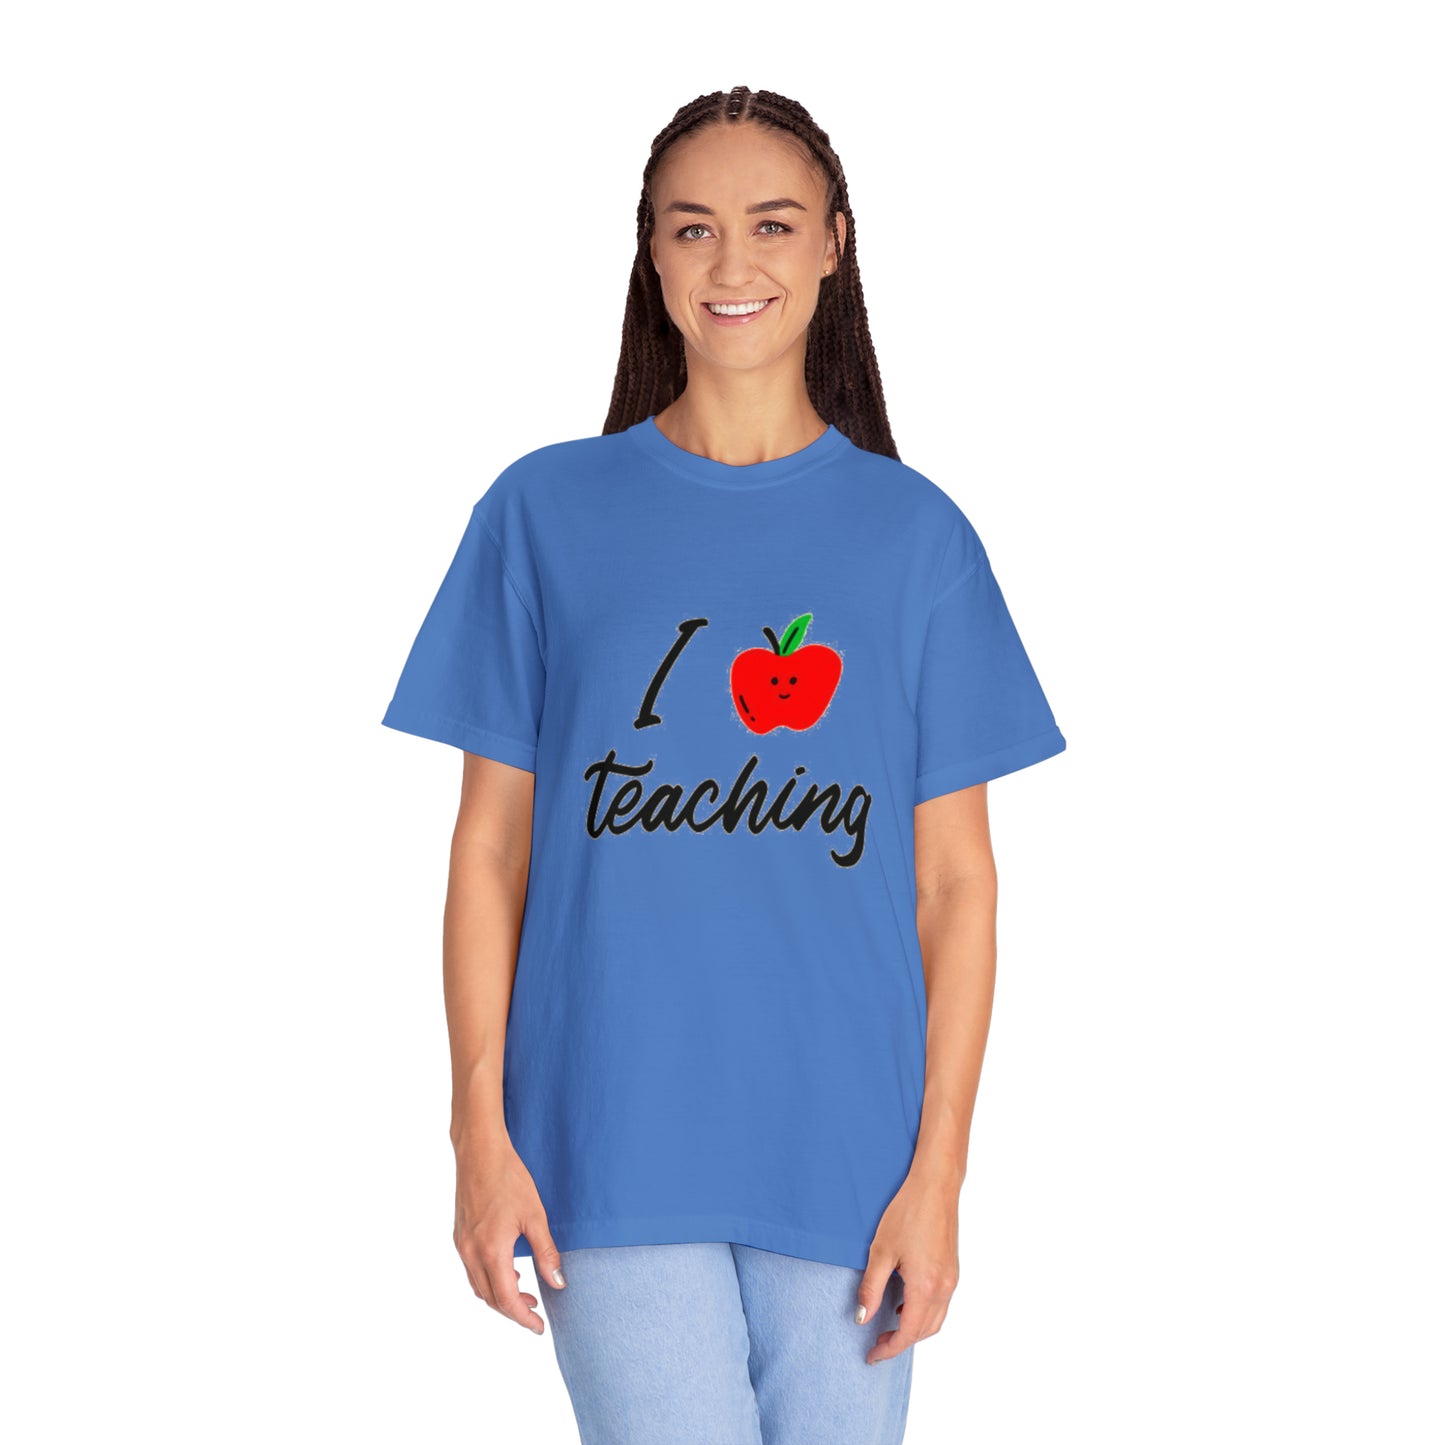 Passionate About Education: "I Love Teaching" T-Shirt